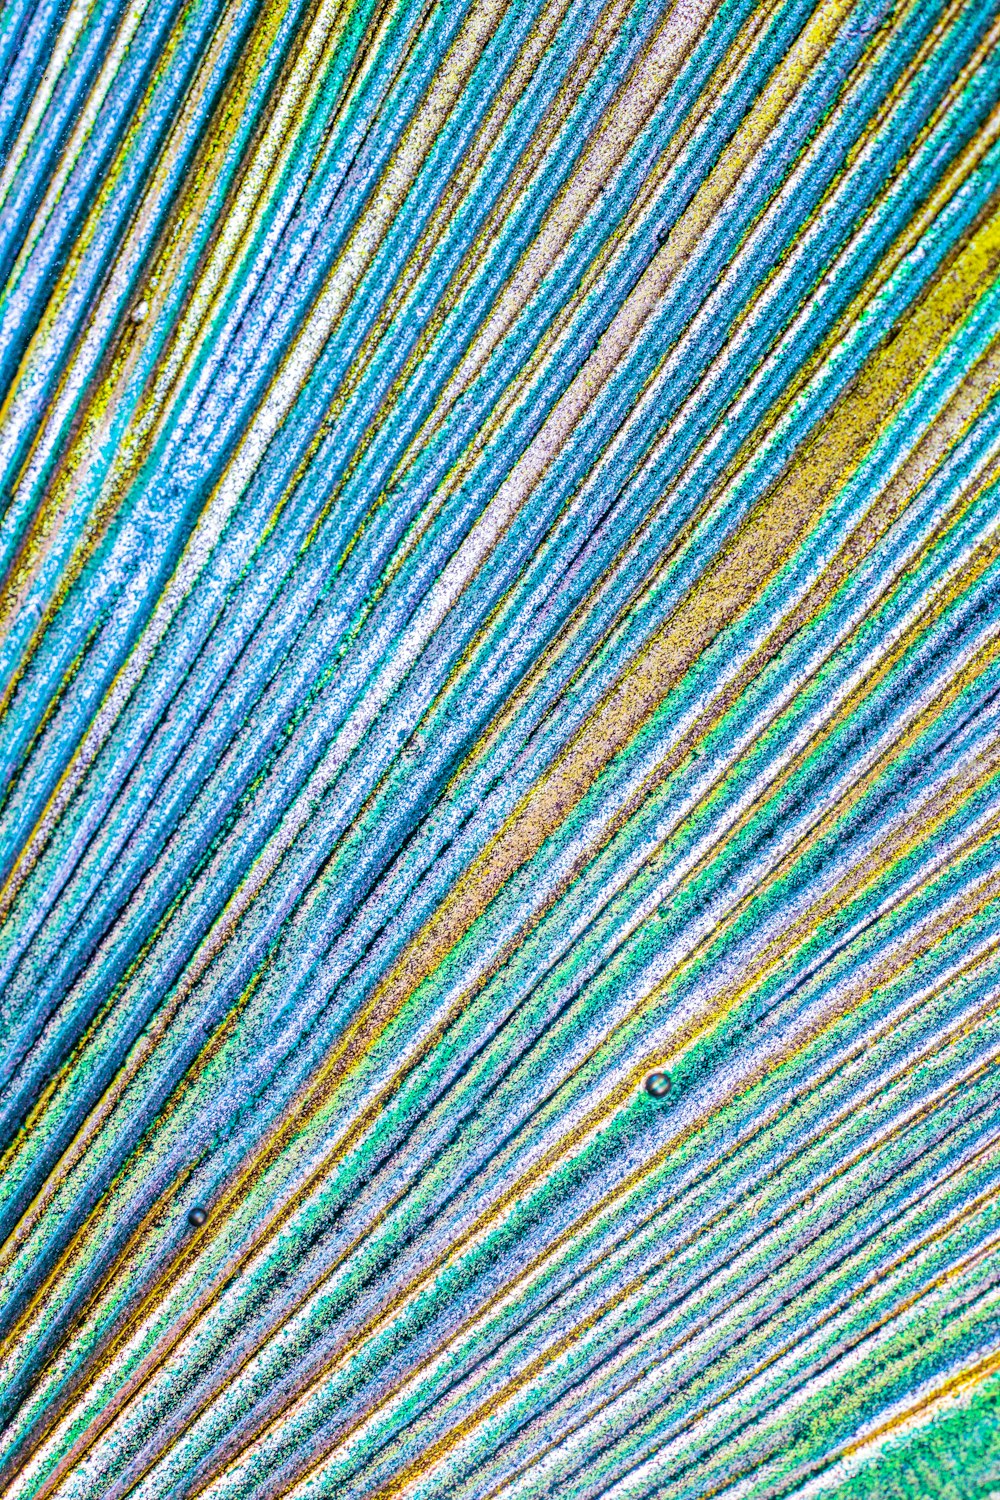 a close up view of a peacock's tail feathers